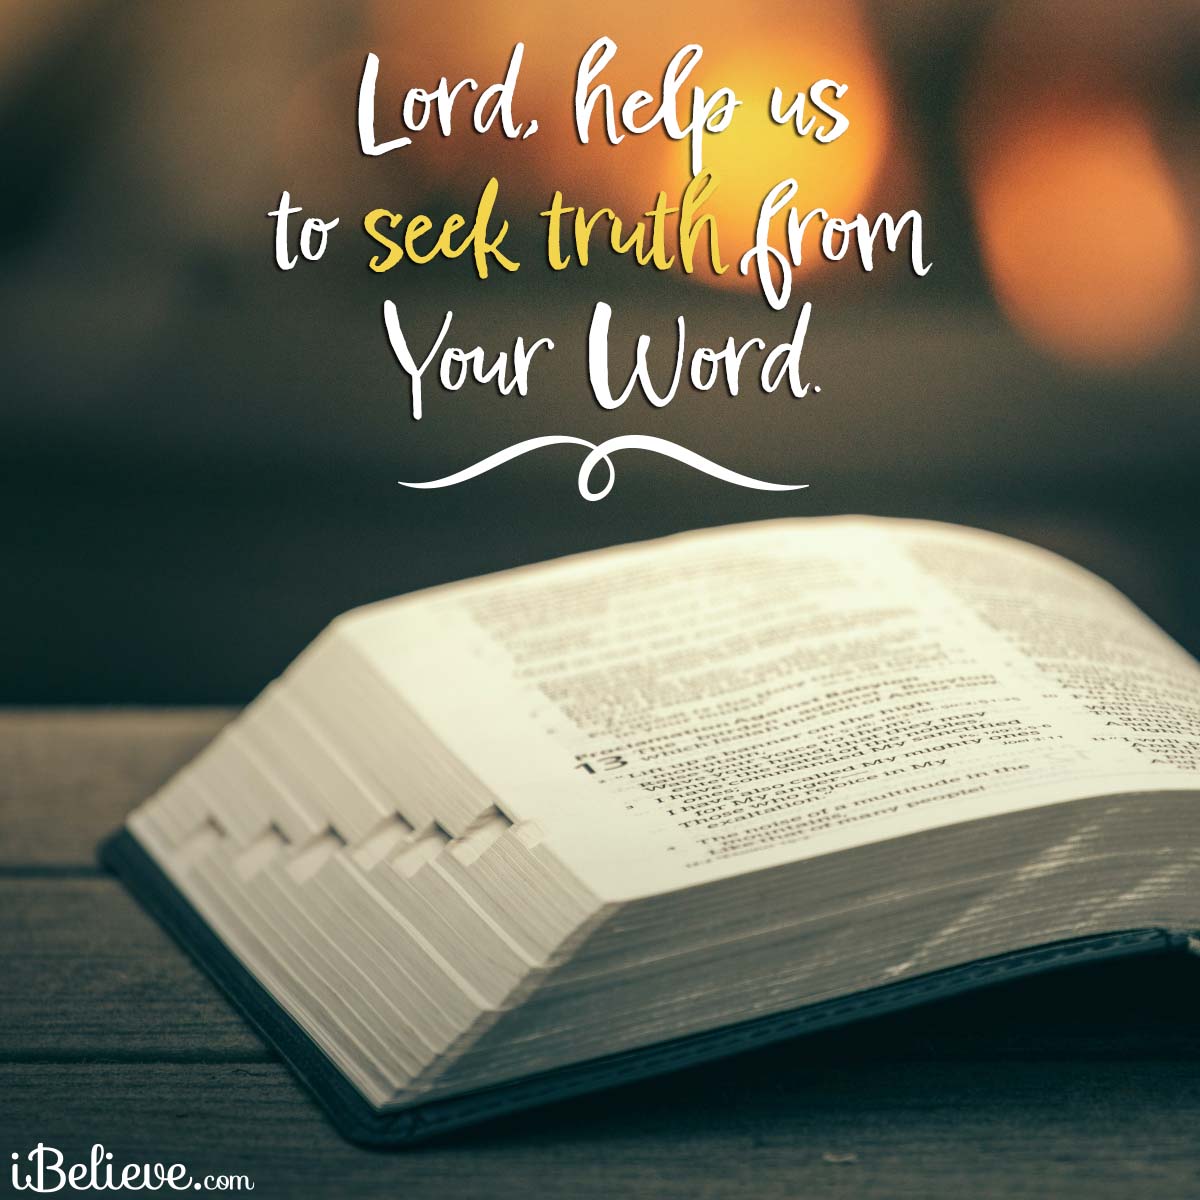 seek truth from Gods Word, inspirational image